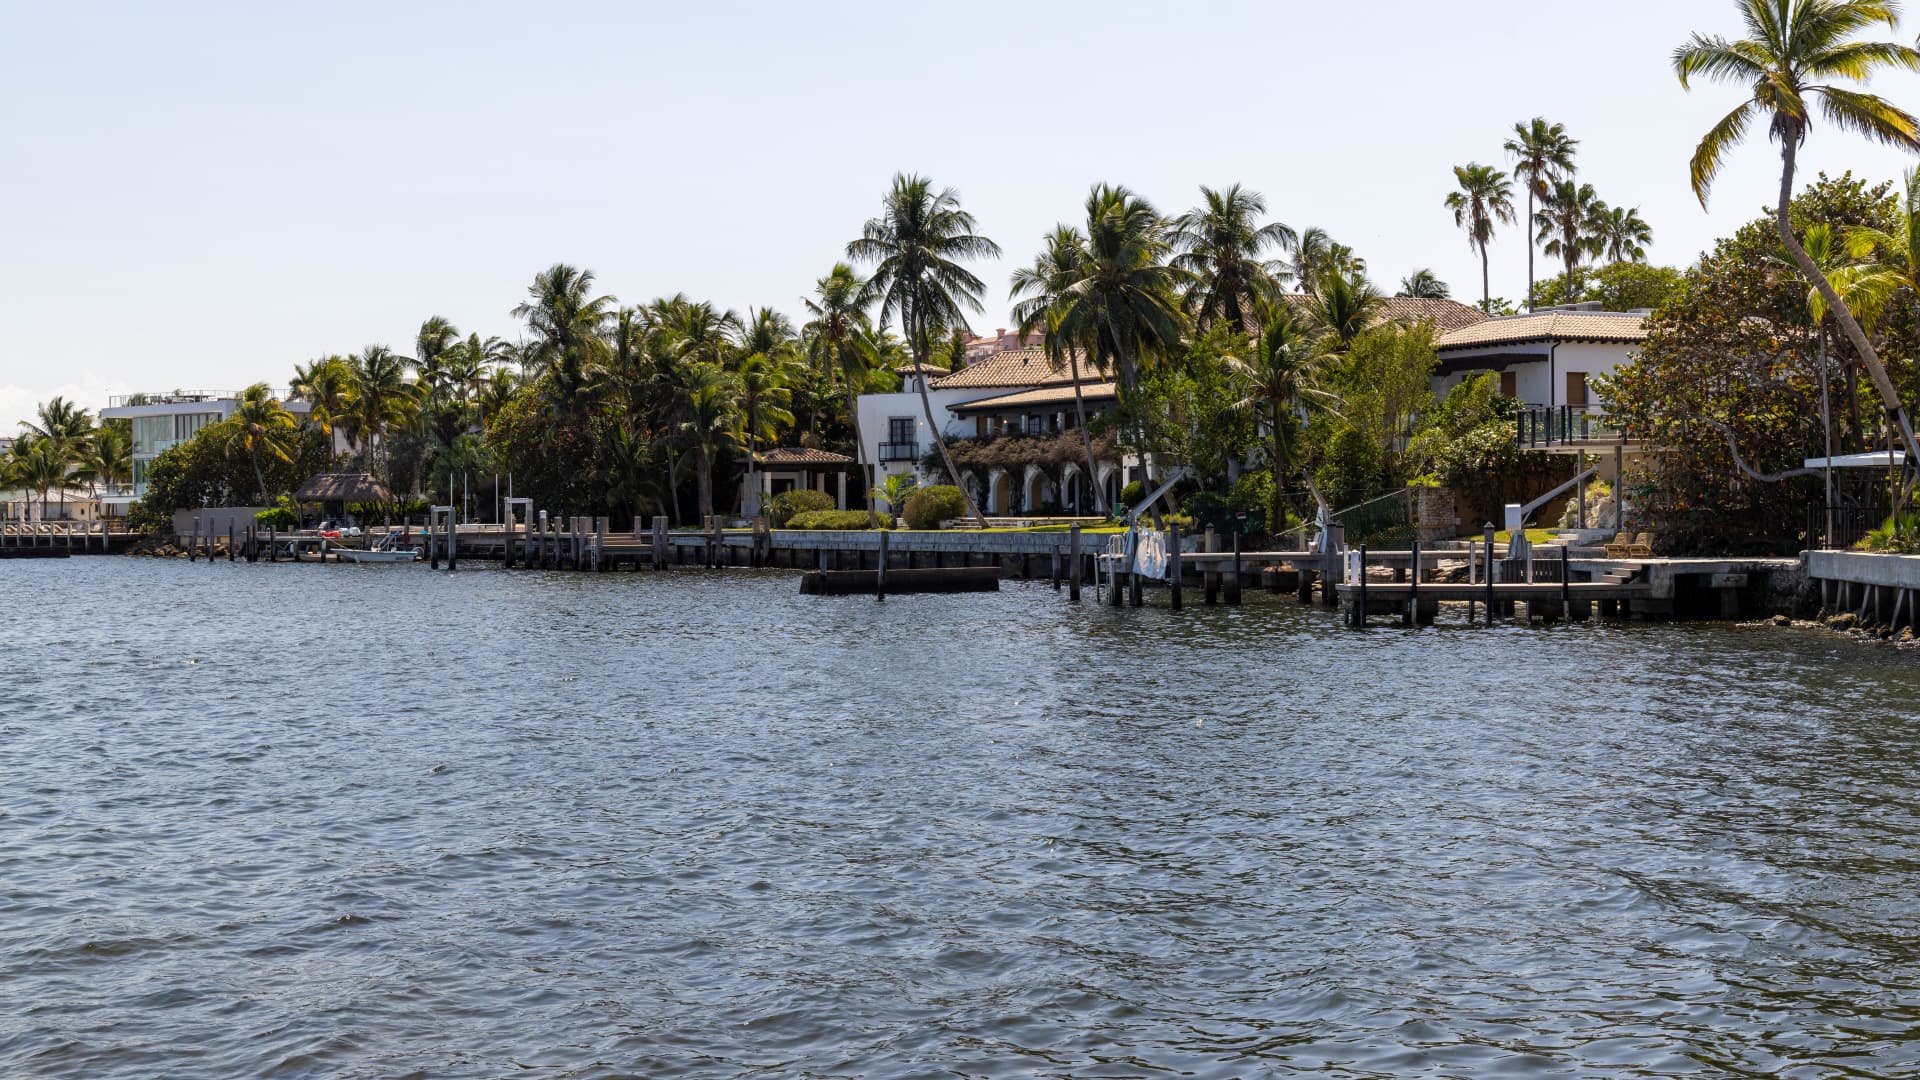 Mansions along Biscayne Bay. As the area has been developed, the number of mangroves has significantly declined.